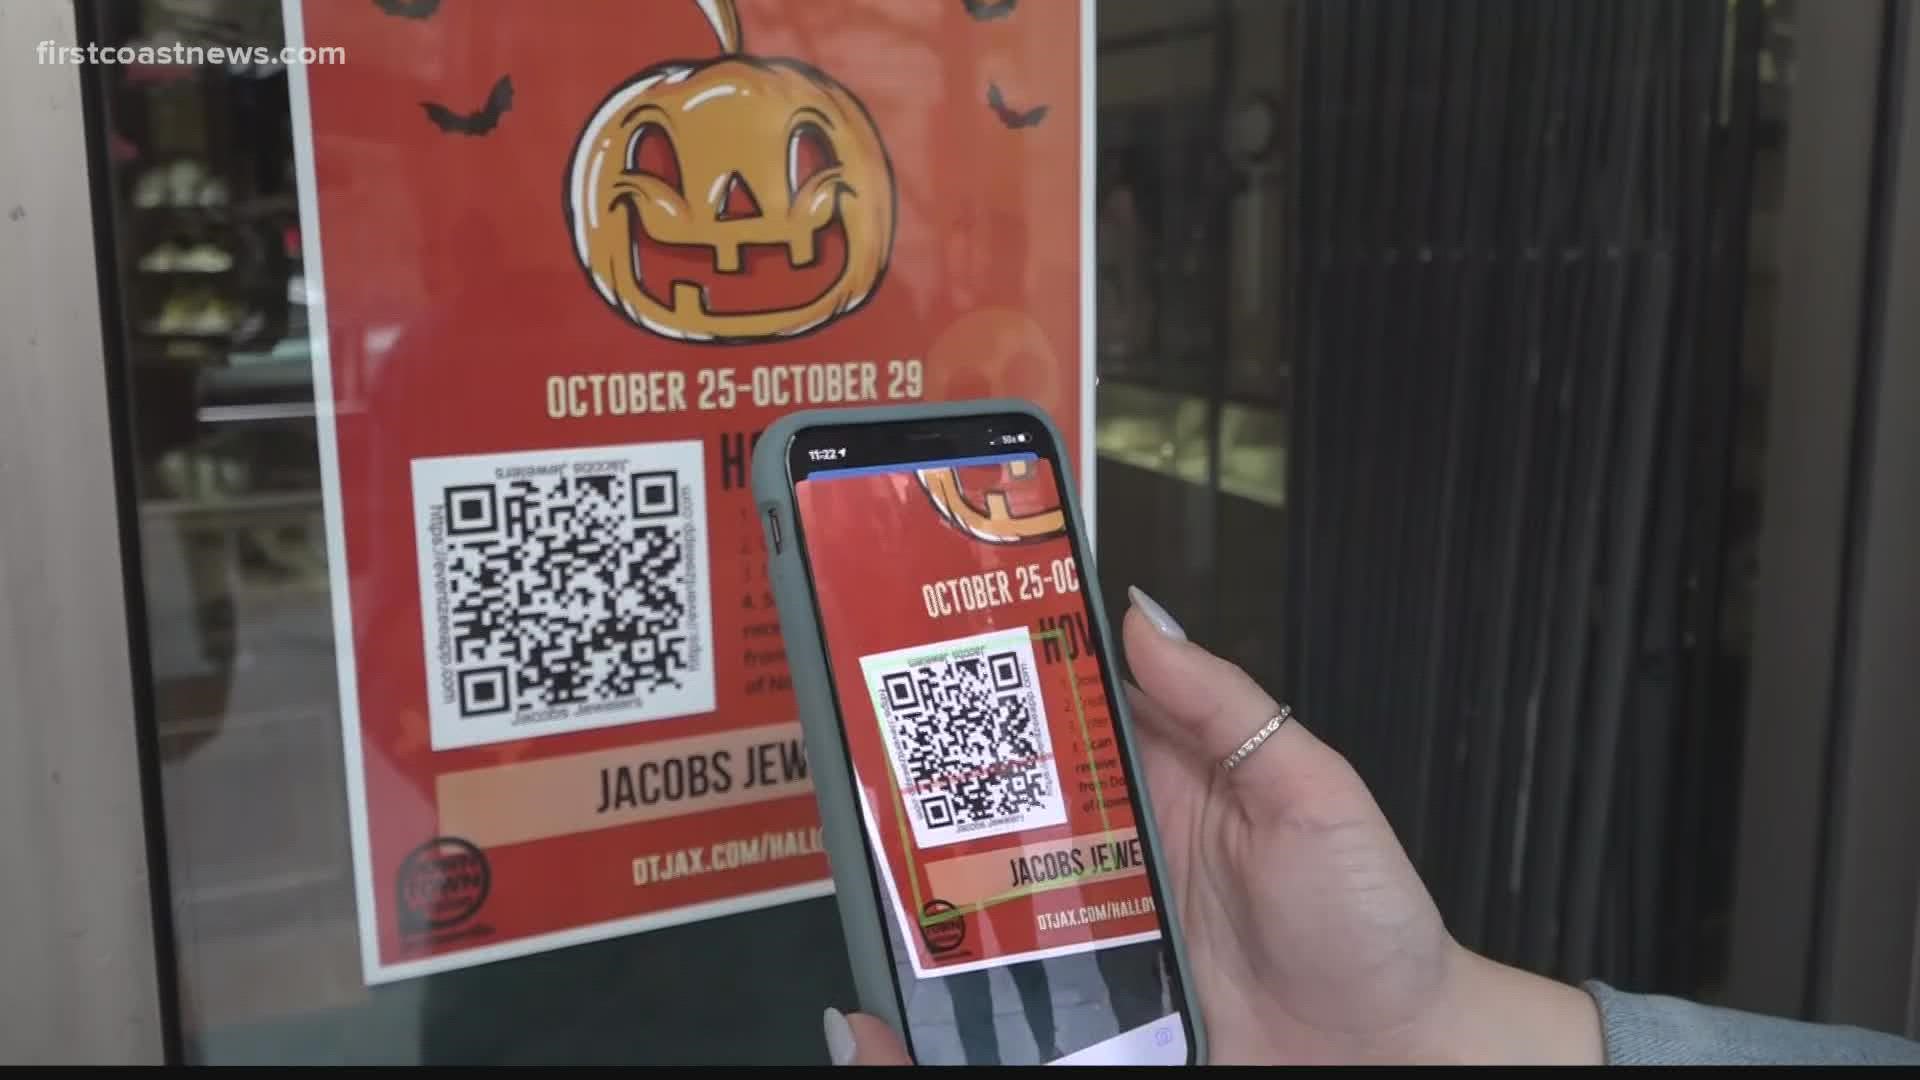 This year, there is a QR code scavenger hunt at businesses across Downtown Jacksonville.